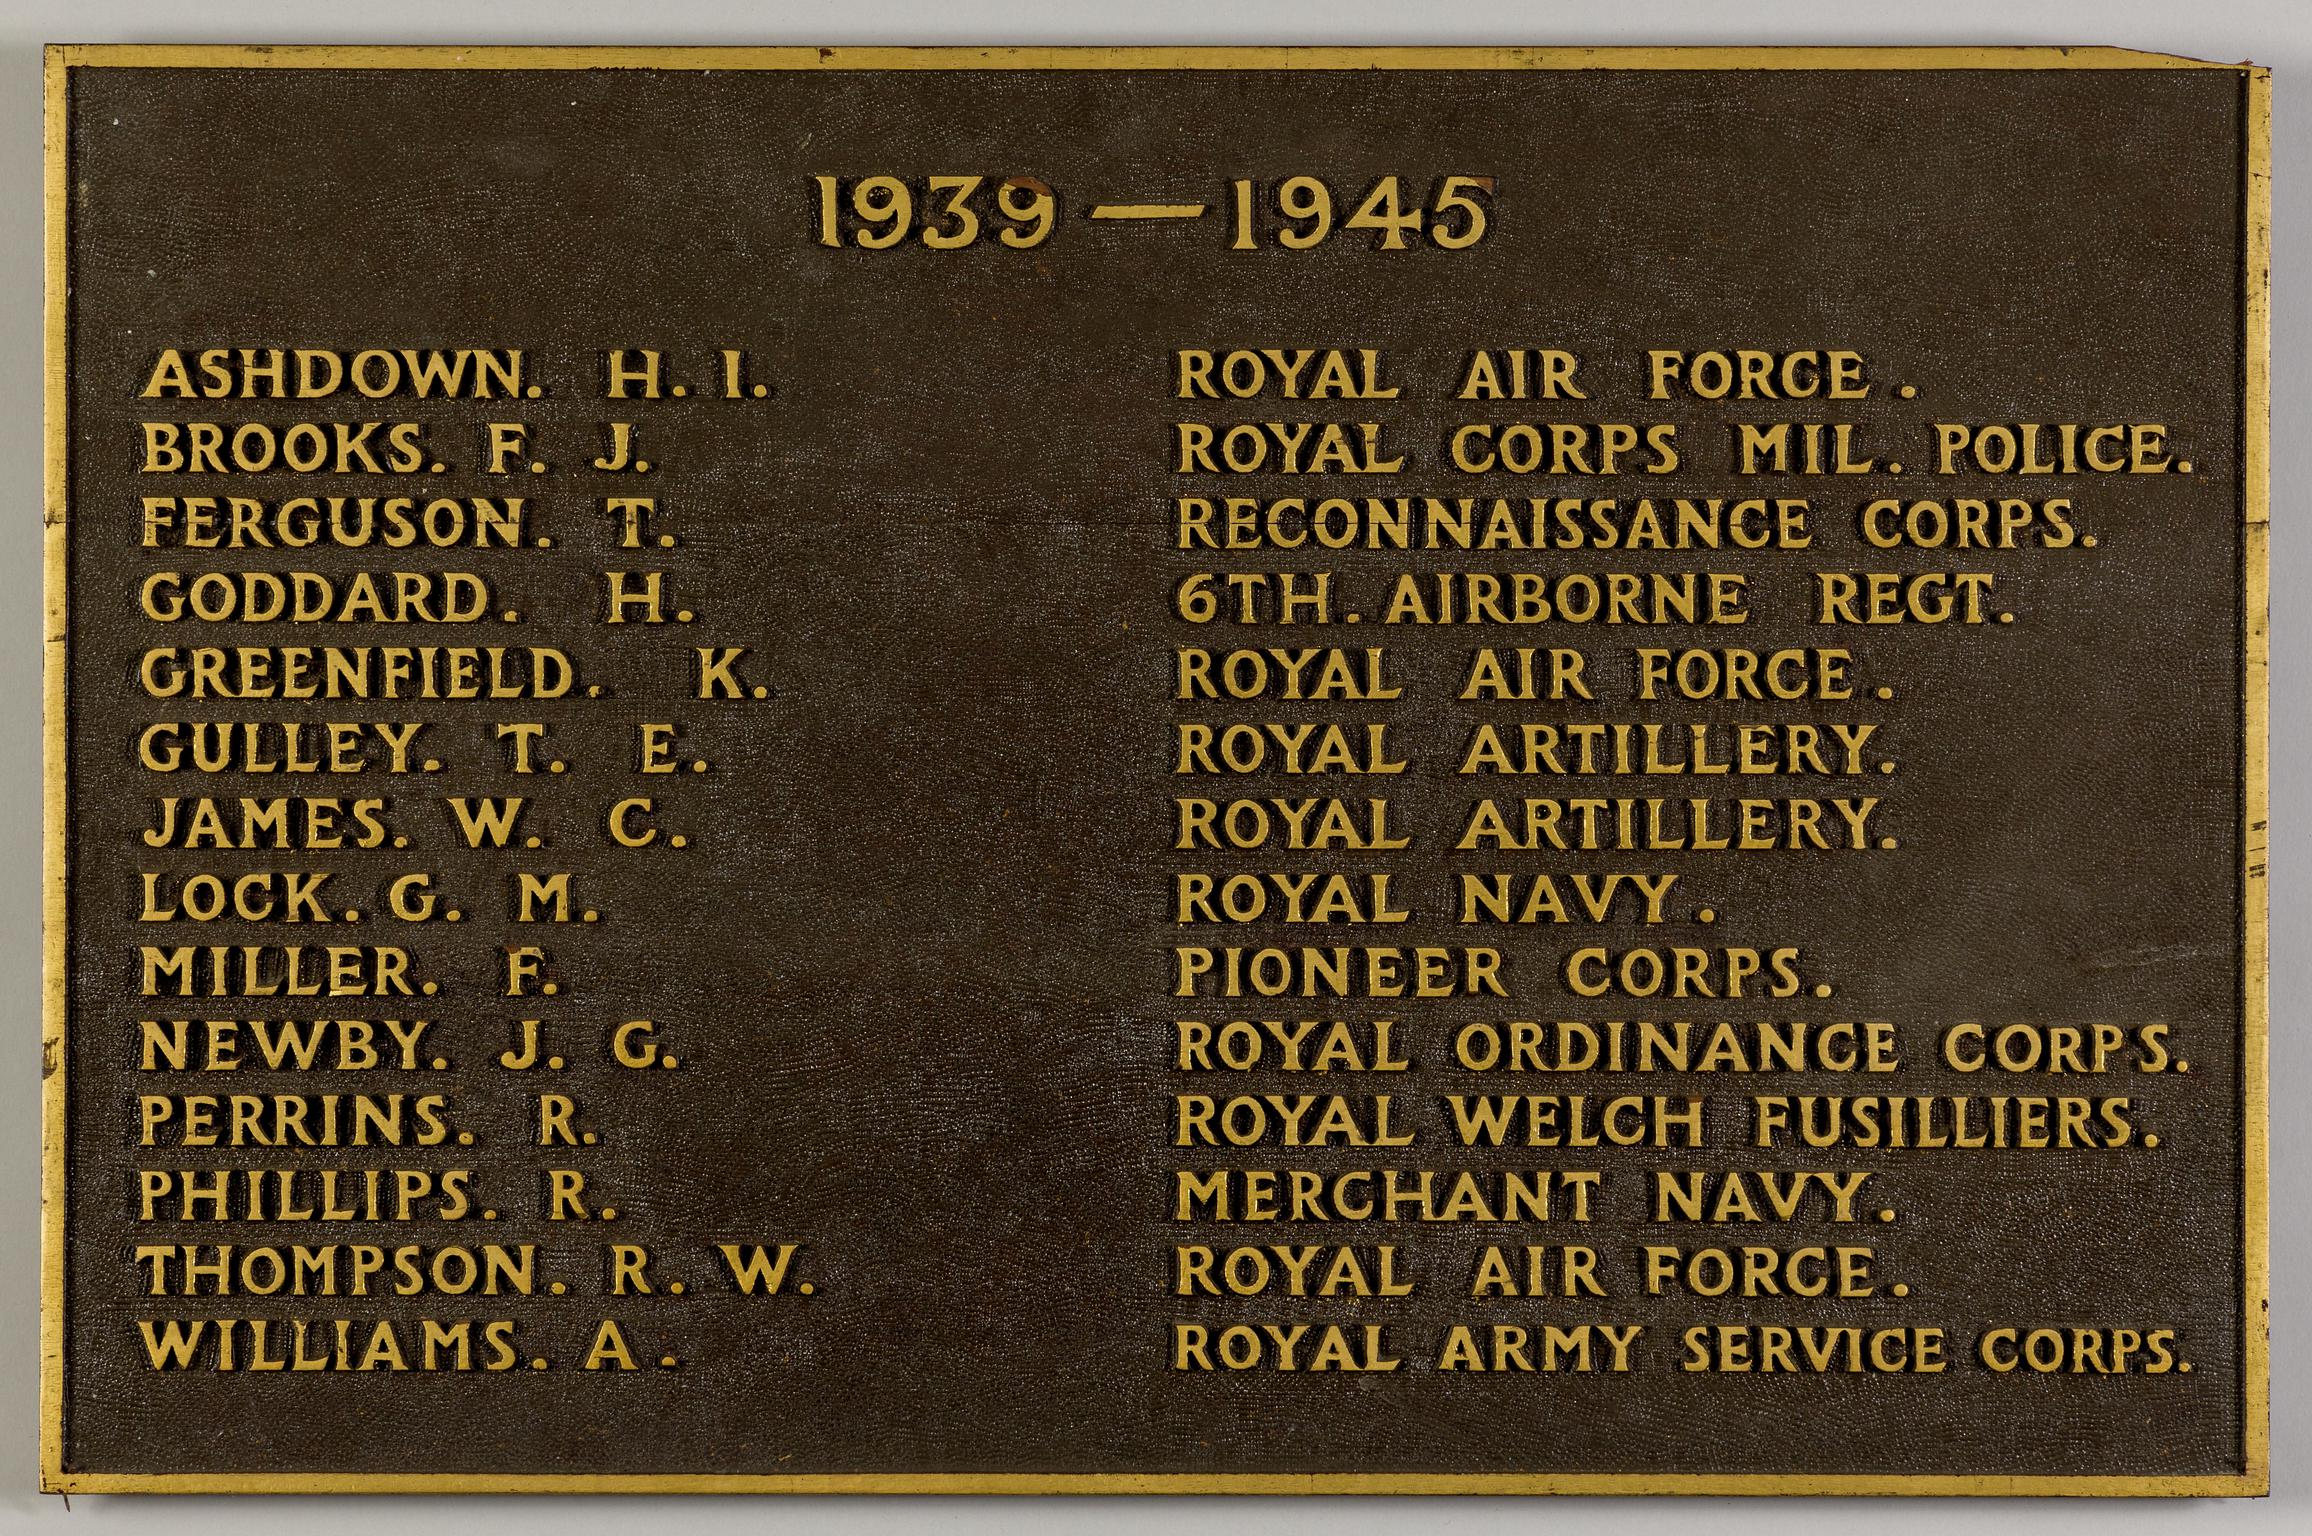 Roll of honour